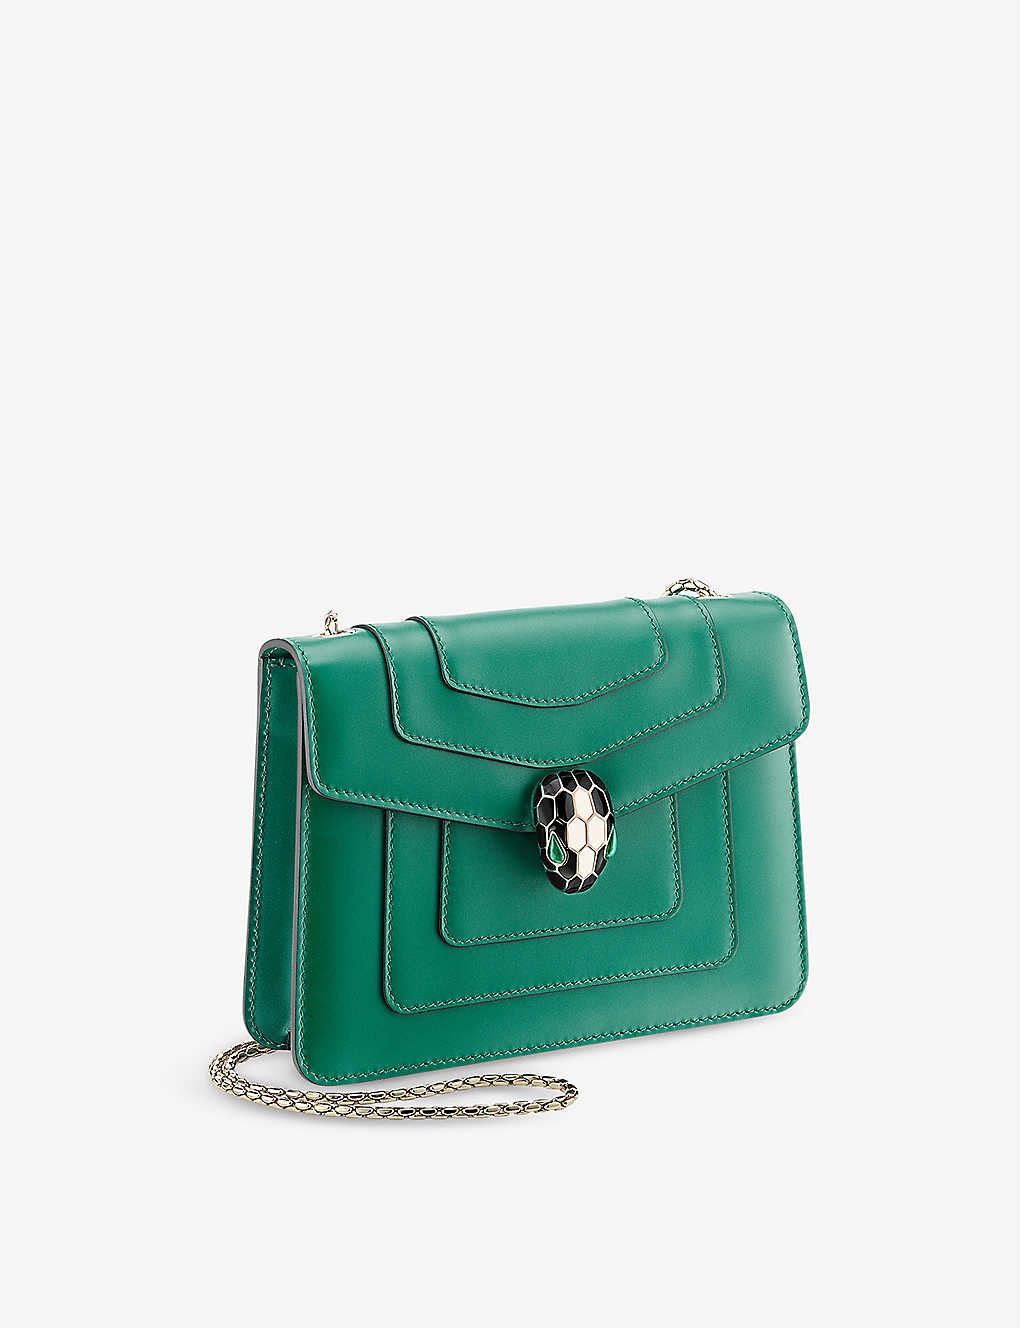 Serpenti Forever leather cross-body bag - 2